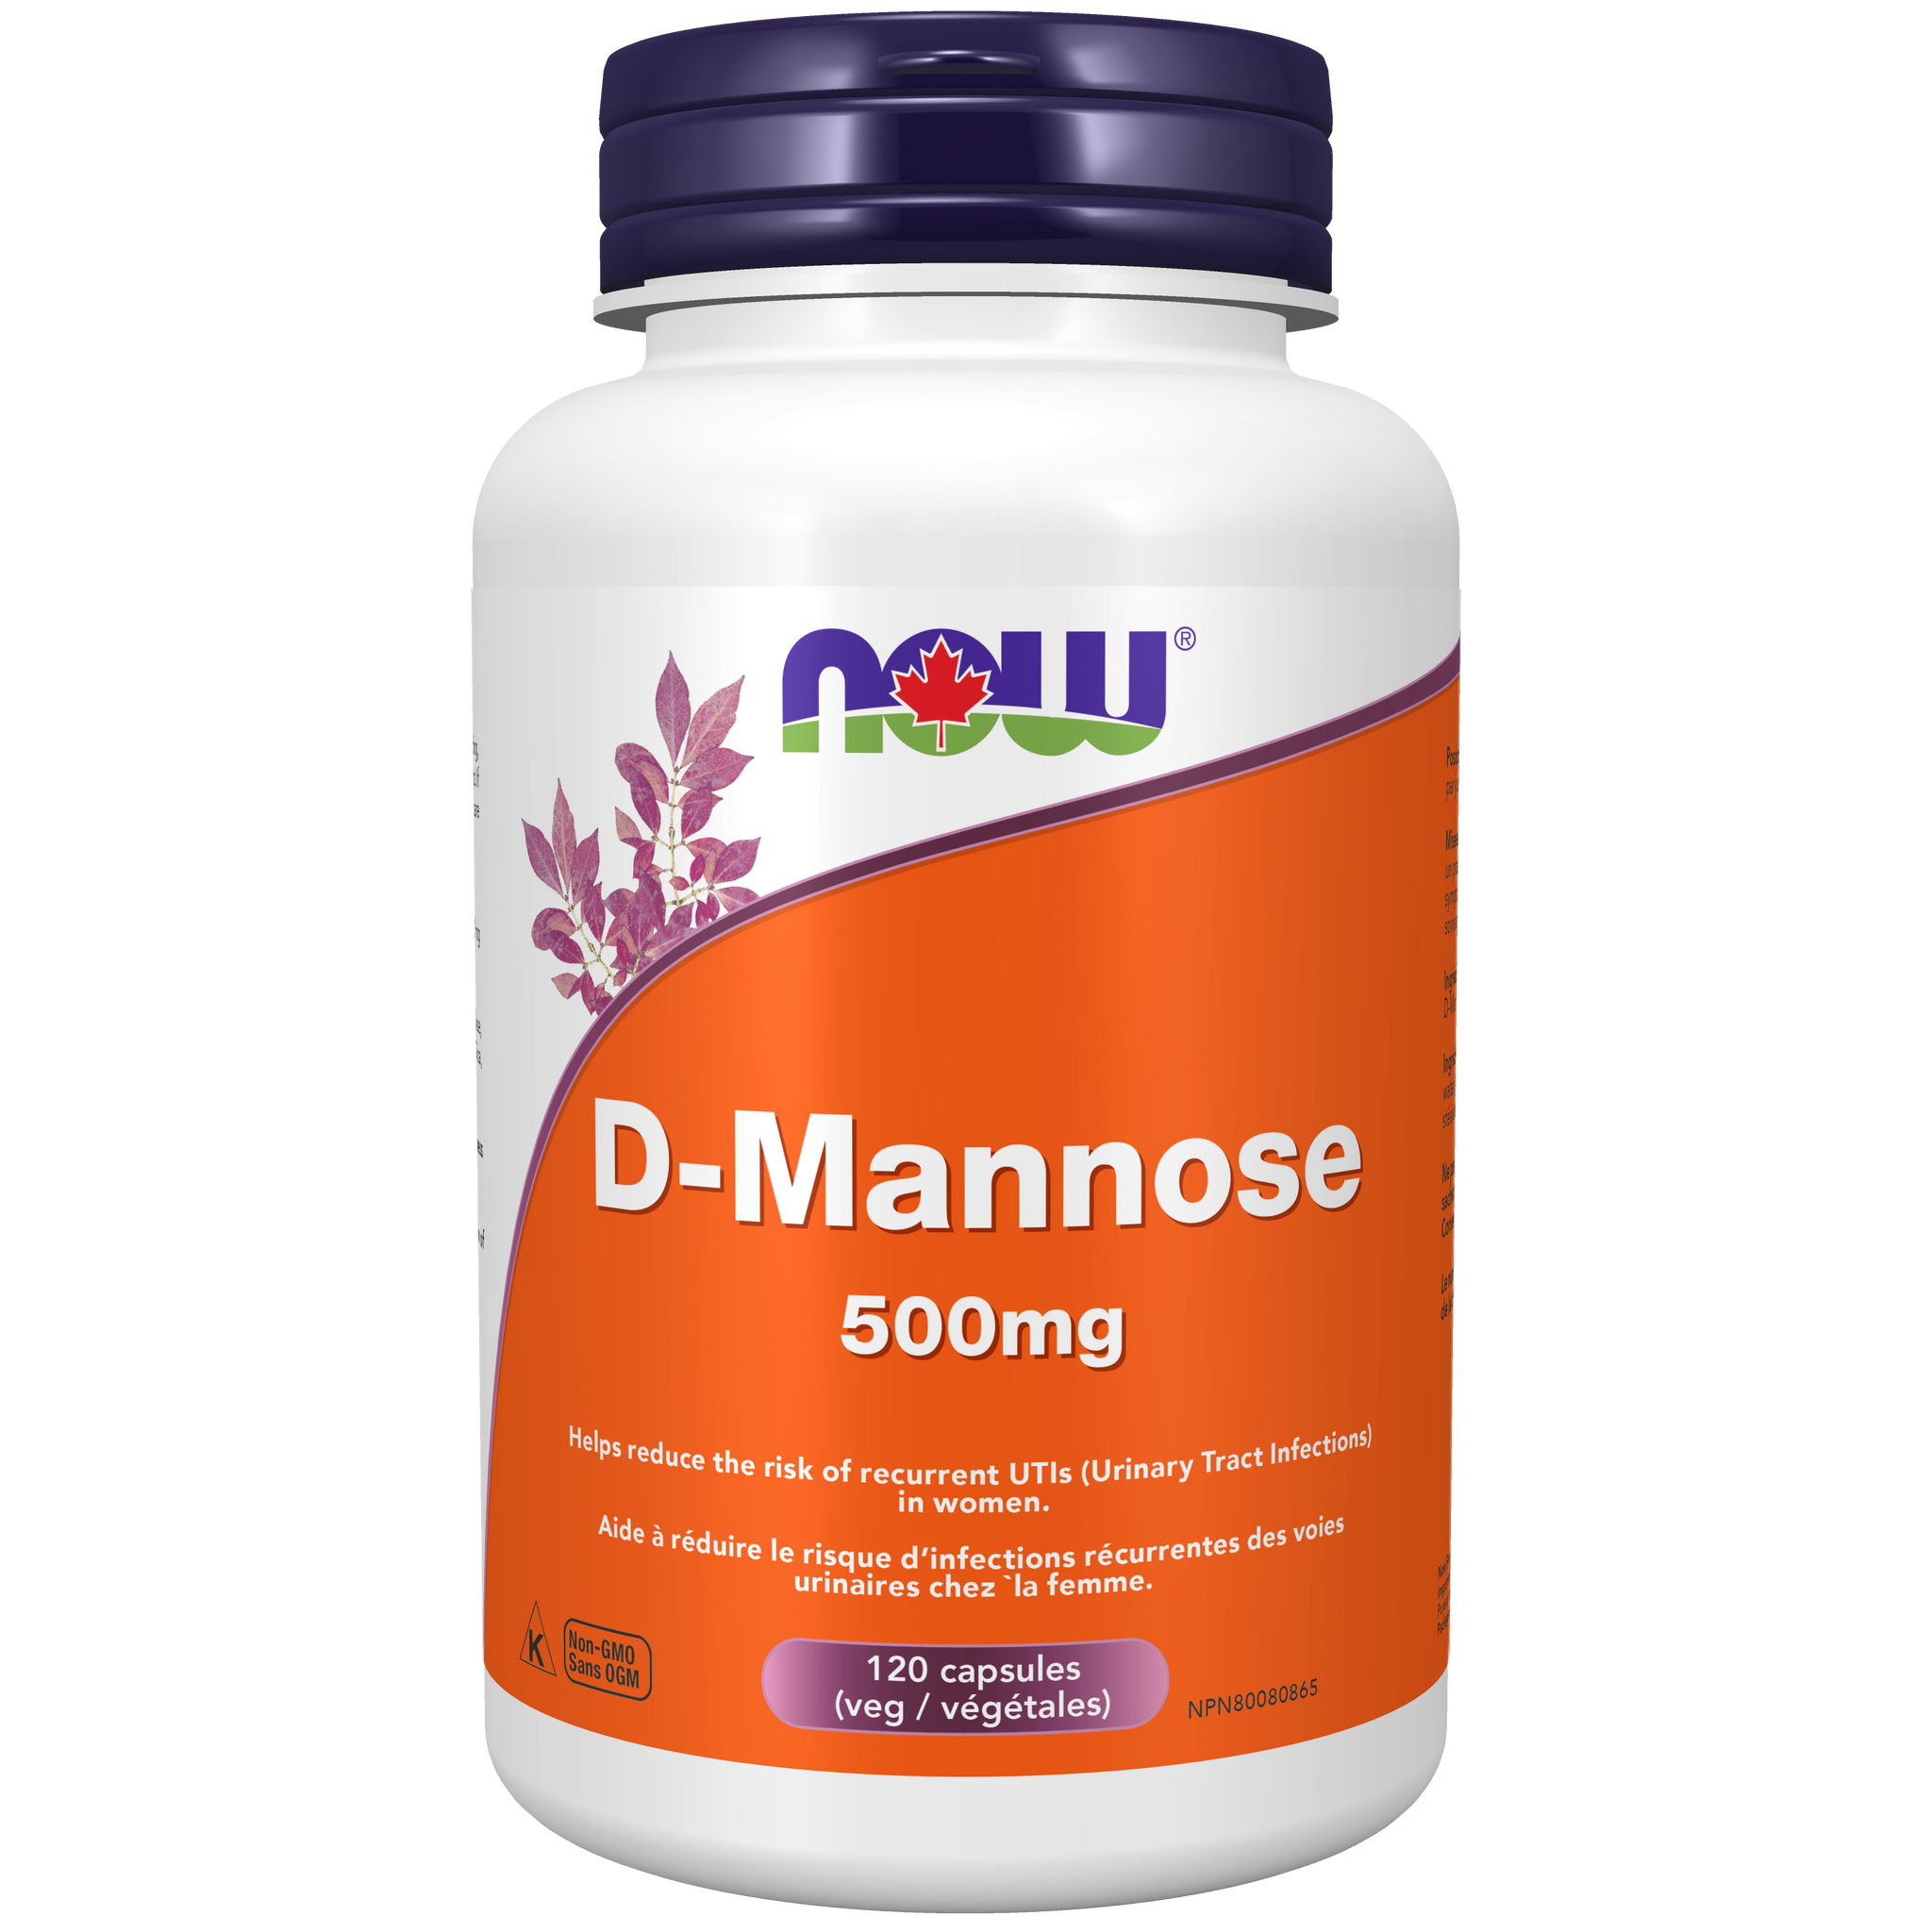 NOW D-Mannose 500mg capsules